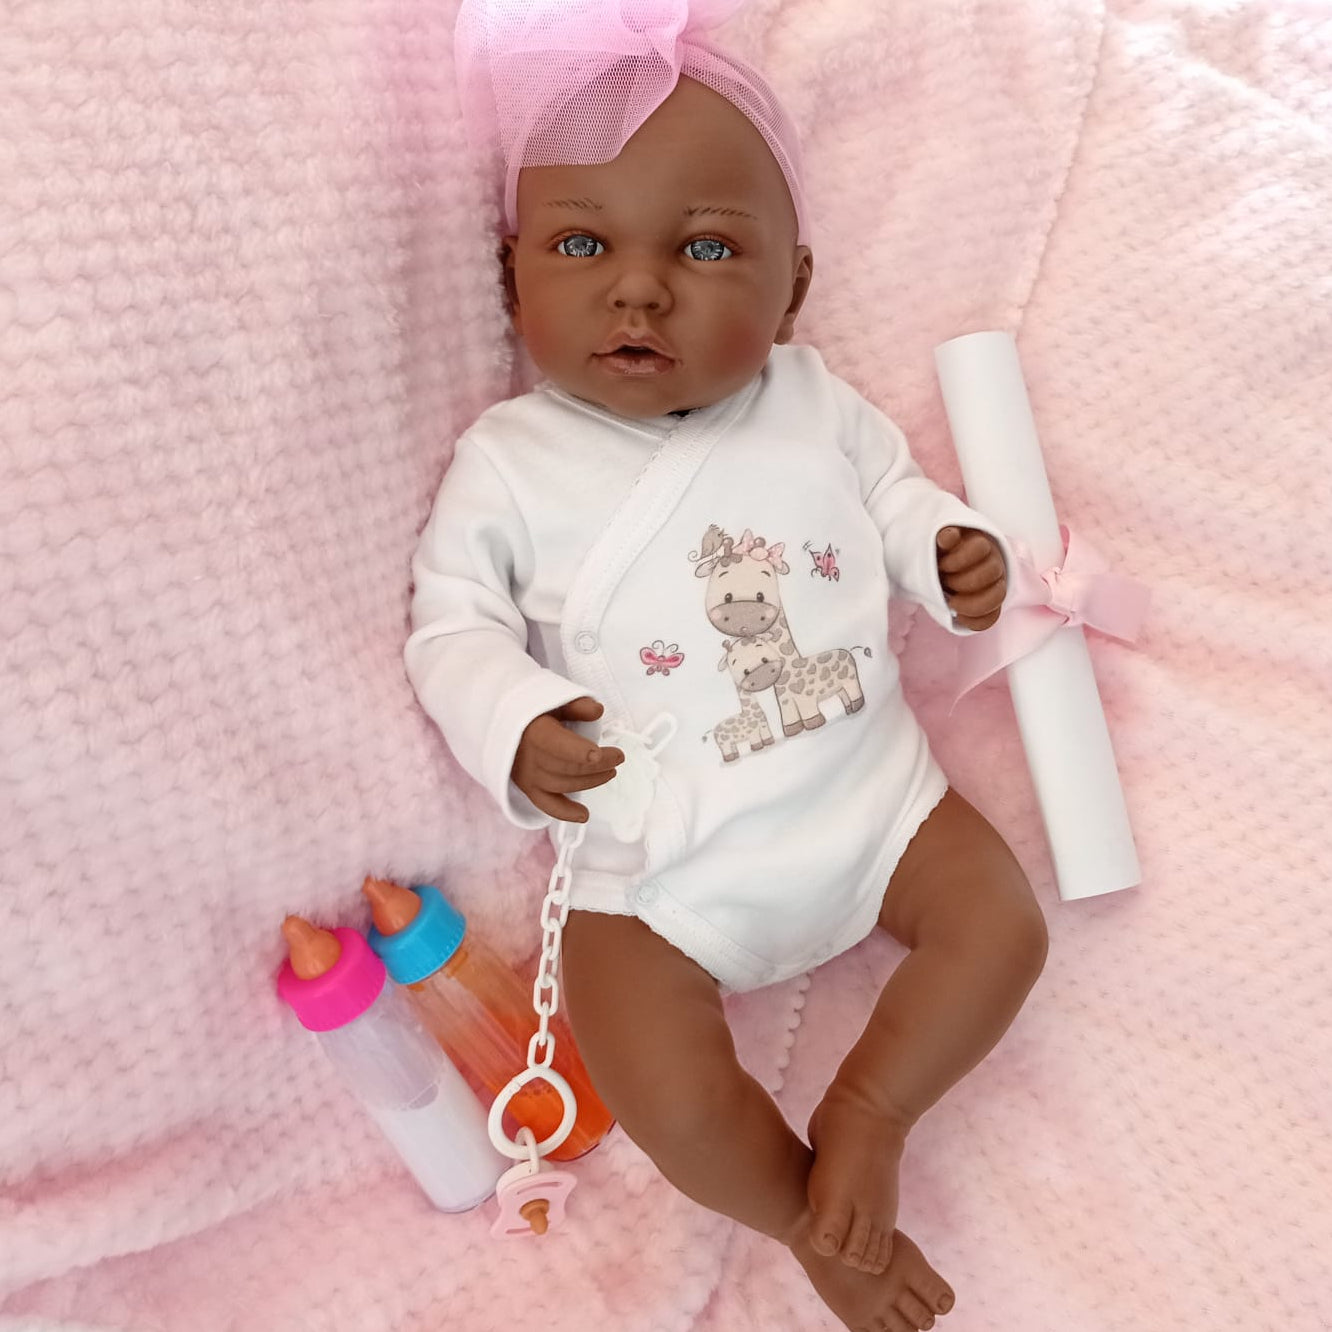 Reborn Baby Doll Reborn Africa - 48CM and 2KG - VINYL and HEAD FALL EFFECT